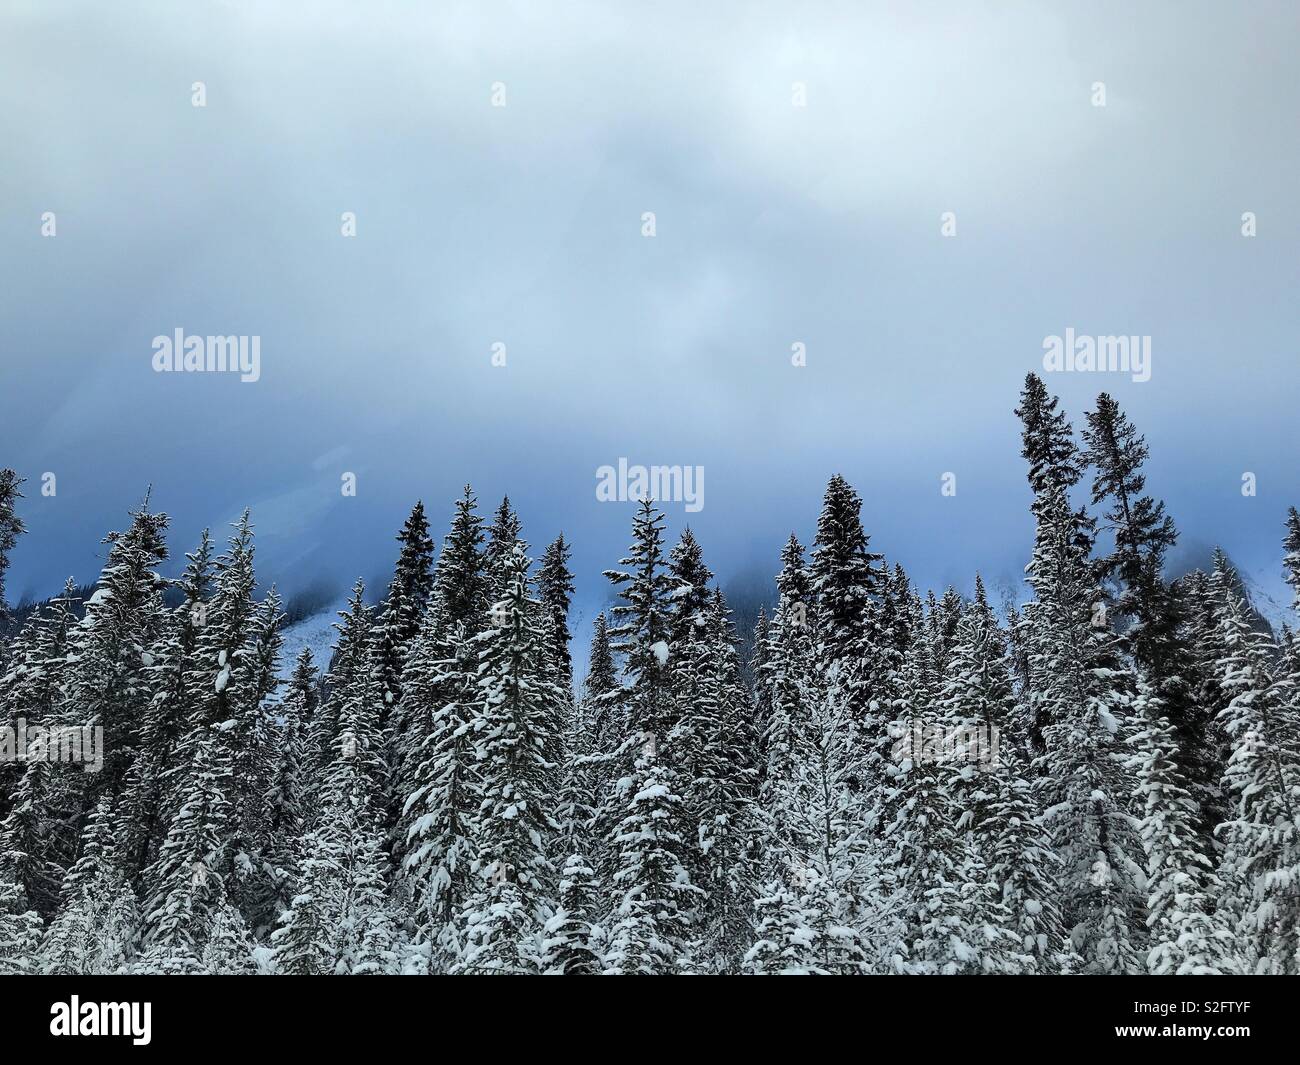 Clouds shroud mountains with an odd blue light while snow-covered spruce trees stand tall in the foreground. Stock Photo